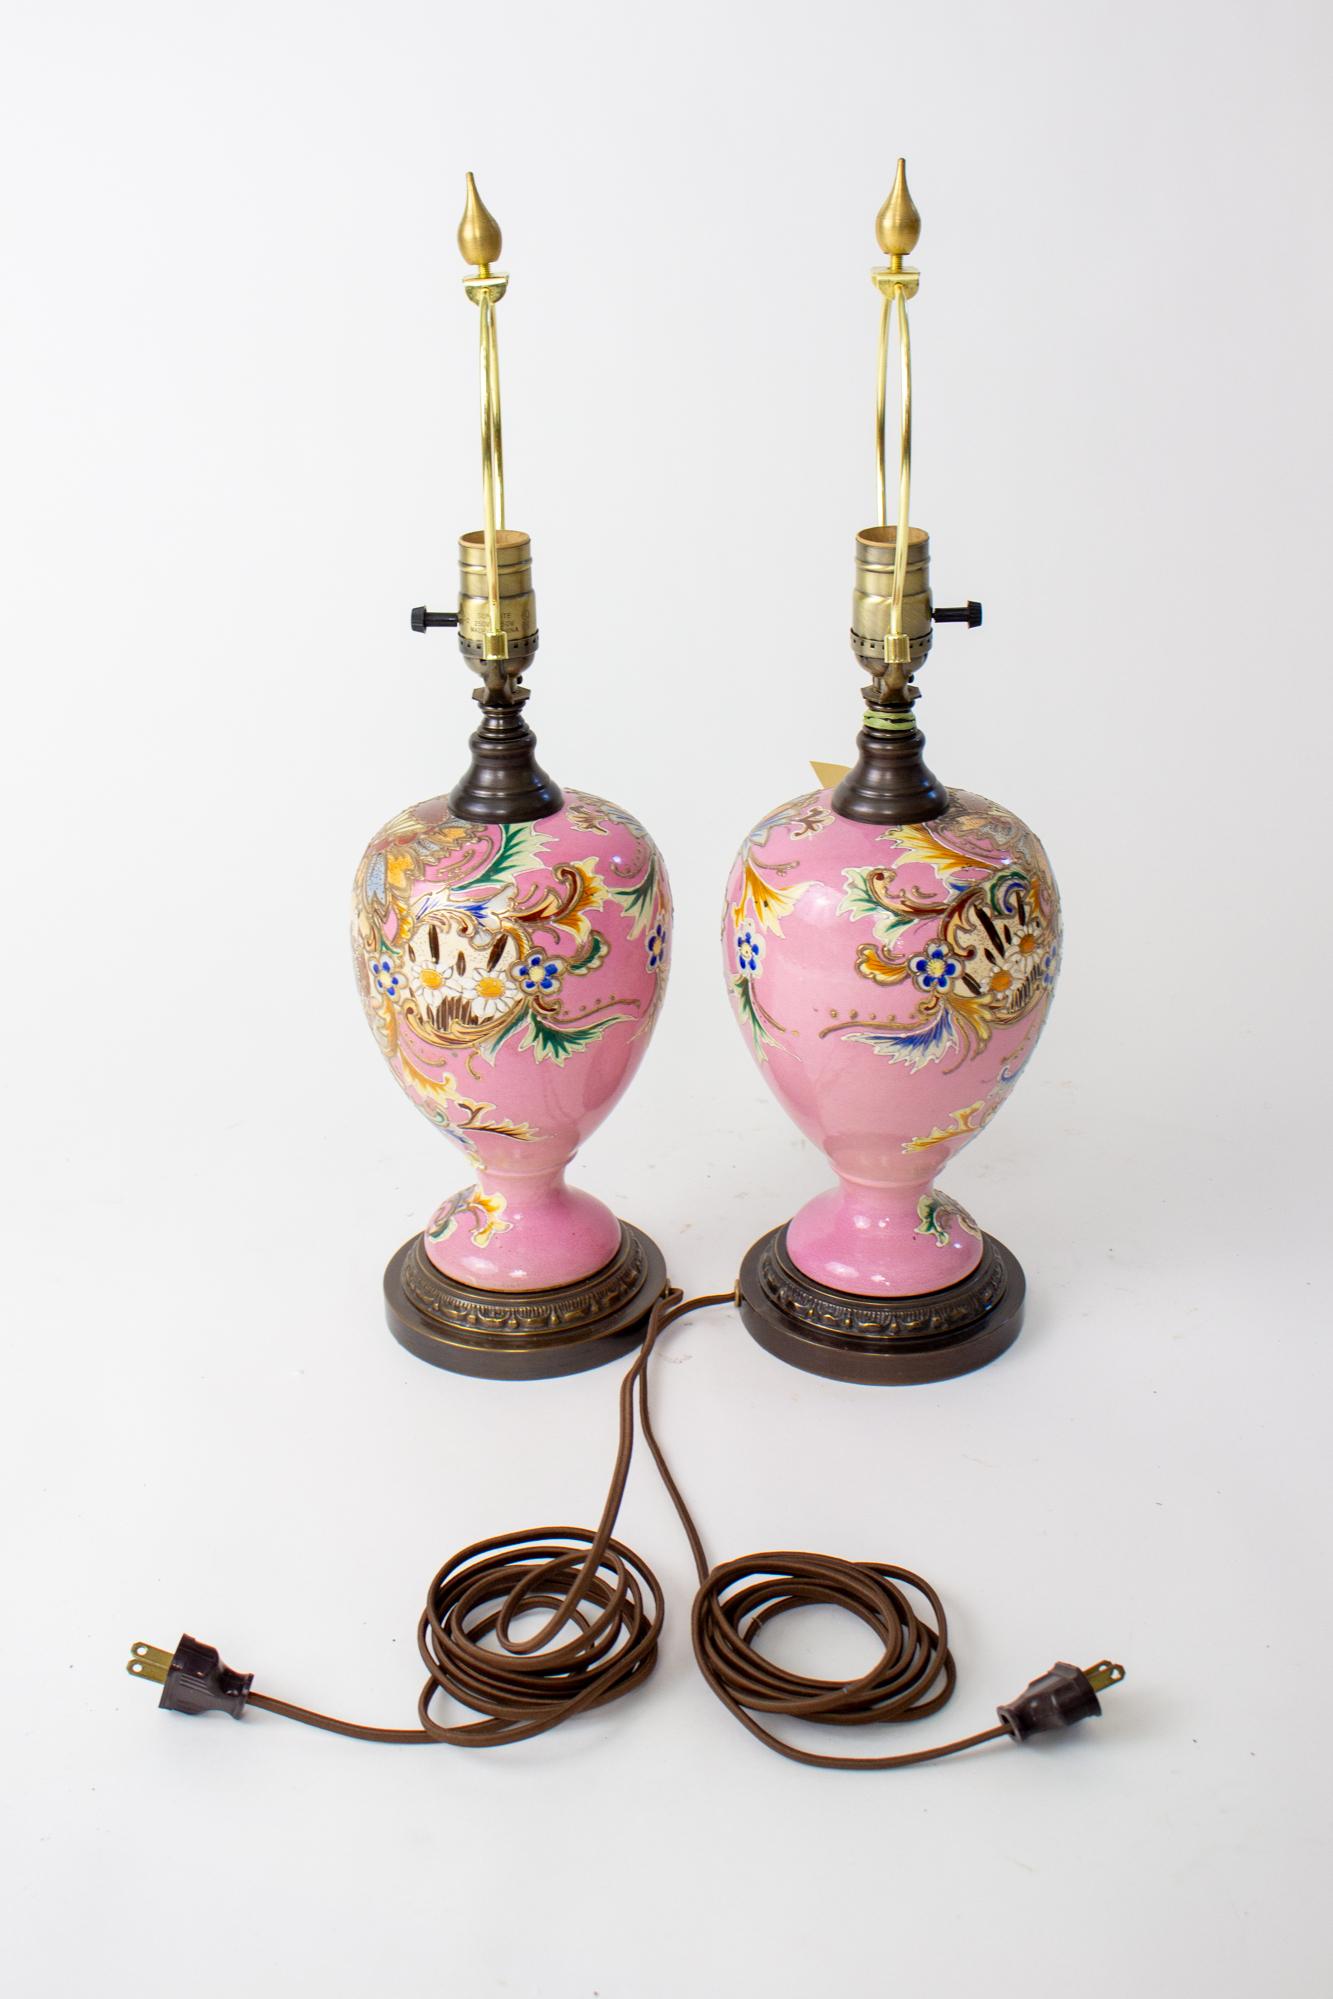 Early 20th Century pink satsuma table lamps - a pair. An unusual pair of pink satsuma table lamps with wildly drawn flowers and swirls with a portrait of a man and woman in traditional Japanese dress. I can honestly describe these as being the moxy